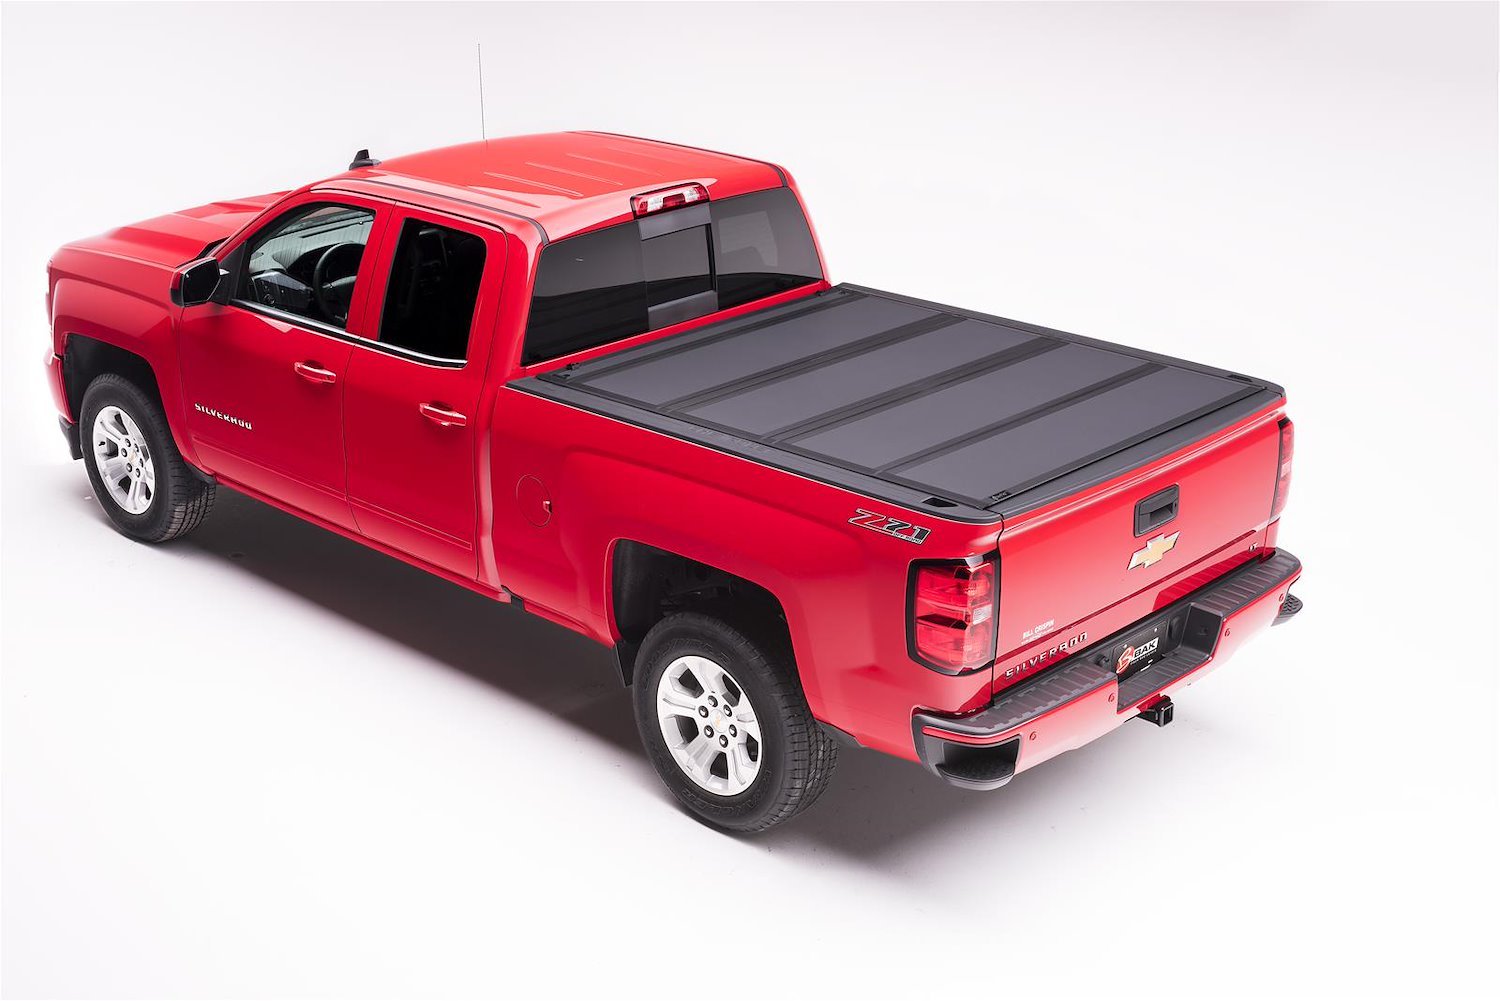 448122 BAKFlip MX4 for 15-18 GM Silverado/Sierra/2019 Legacy/Limited 8.2 ft. Bed, Hard Folding Cover Style [Black Finish]